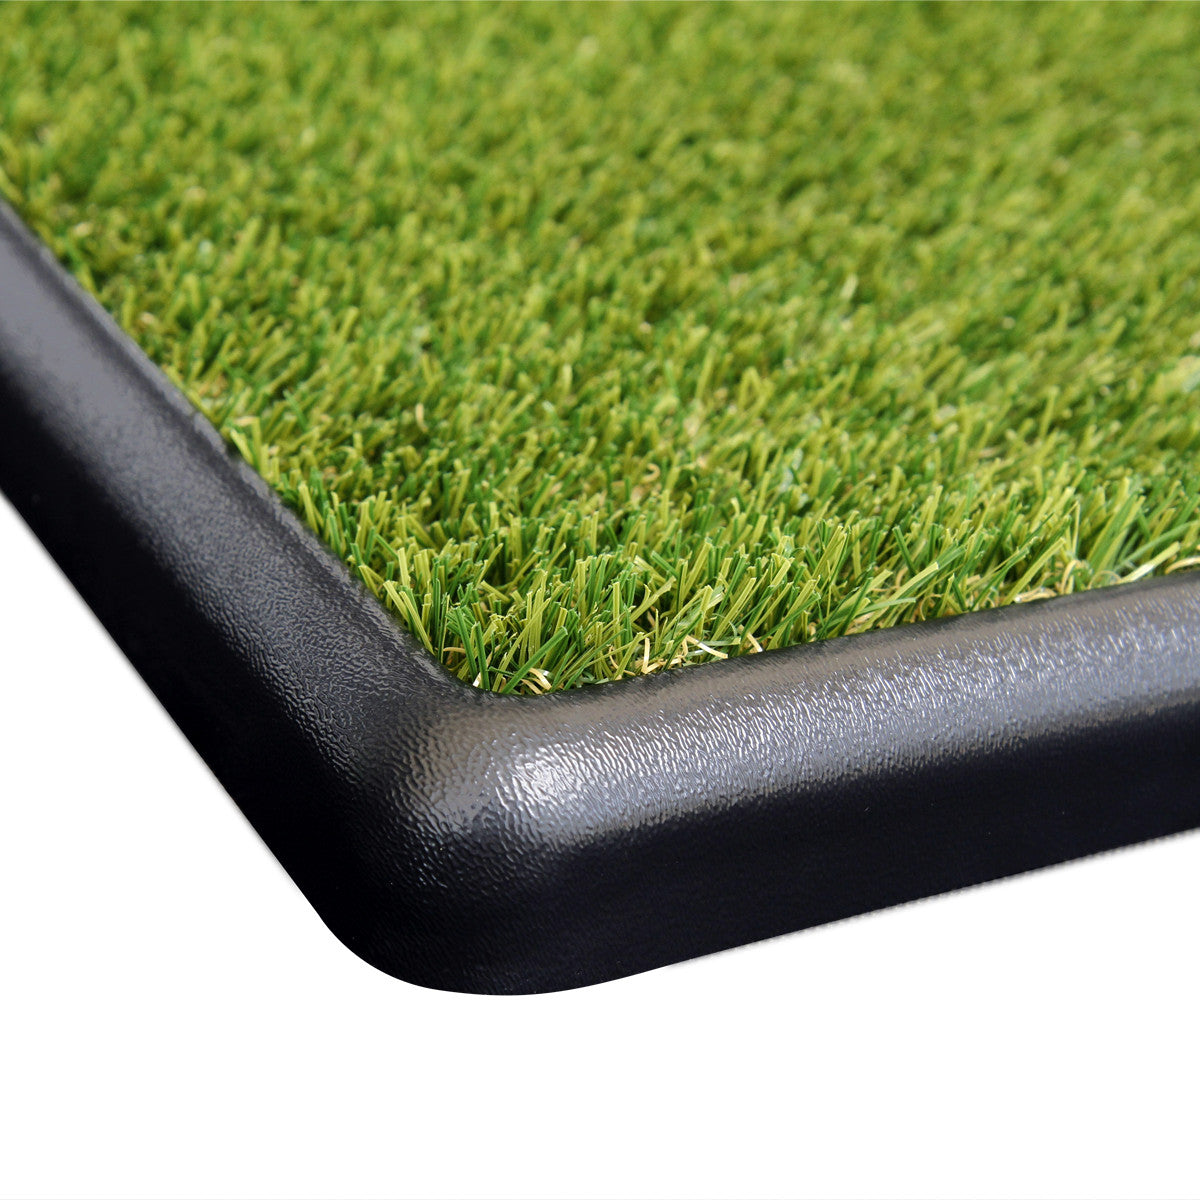 Snug fit grass perfect for cats to dig and scratch